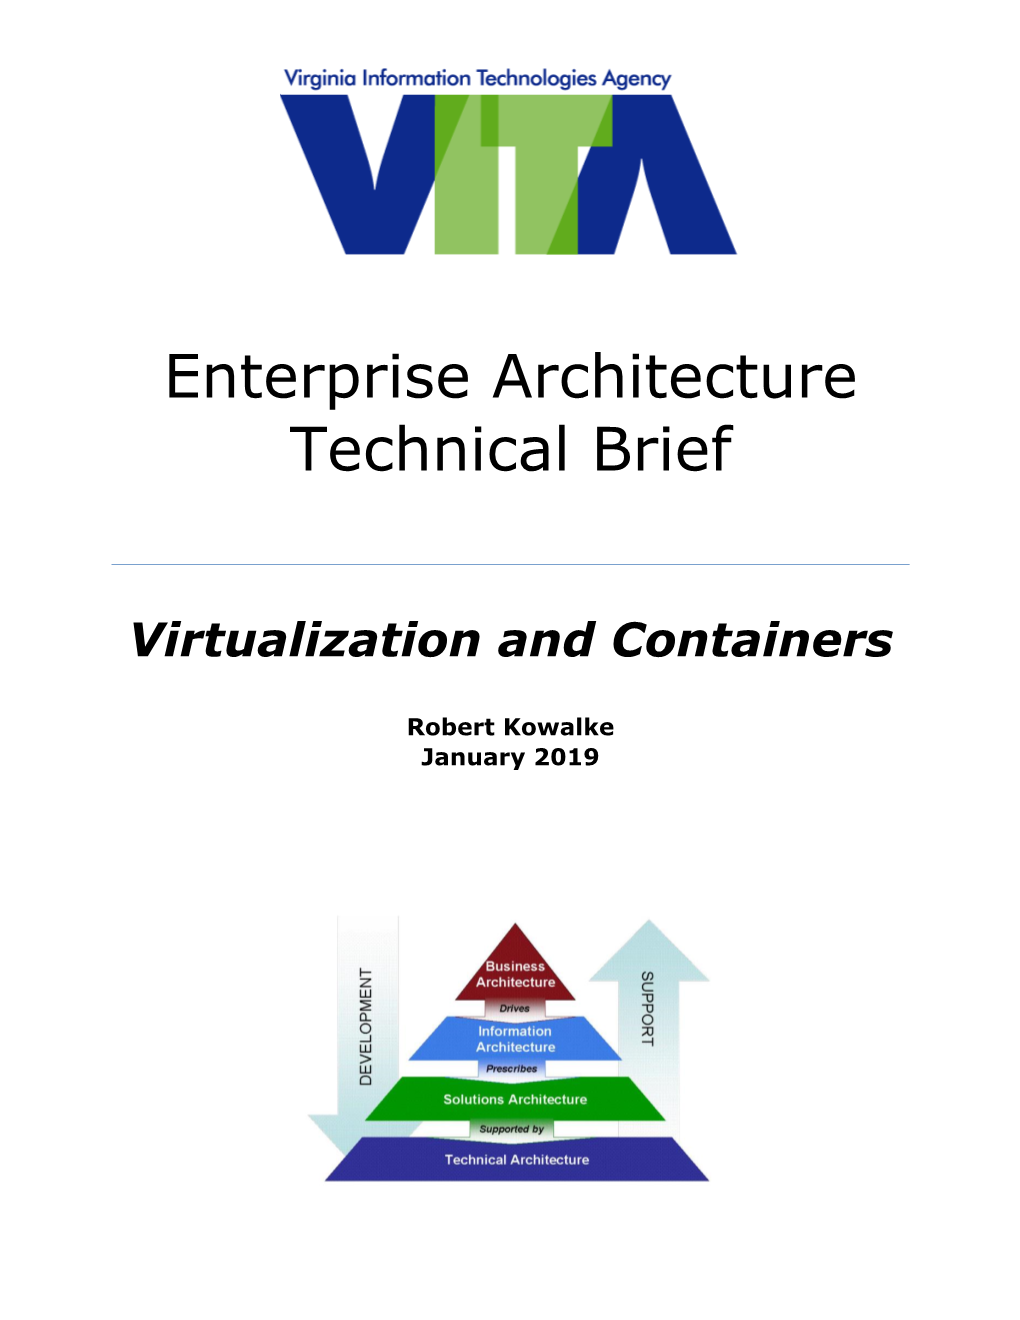 Virtualization and Containers